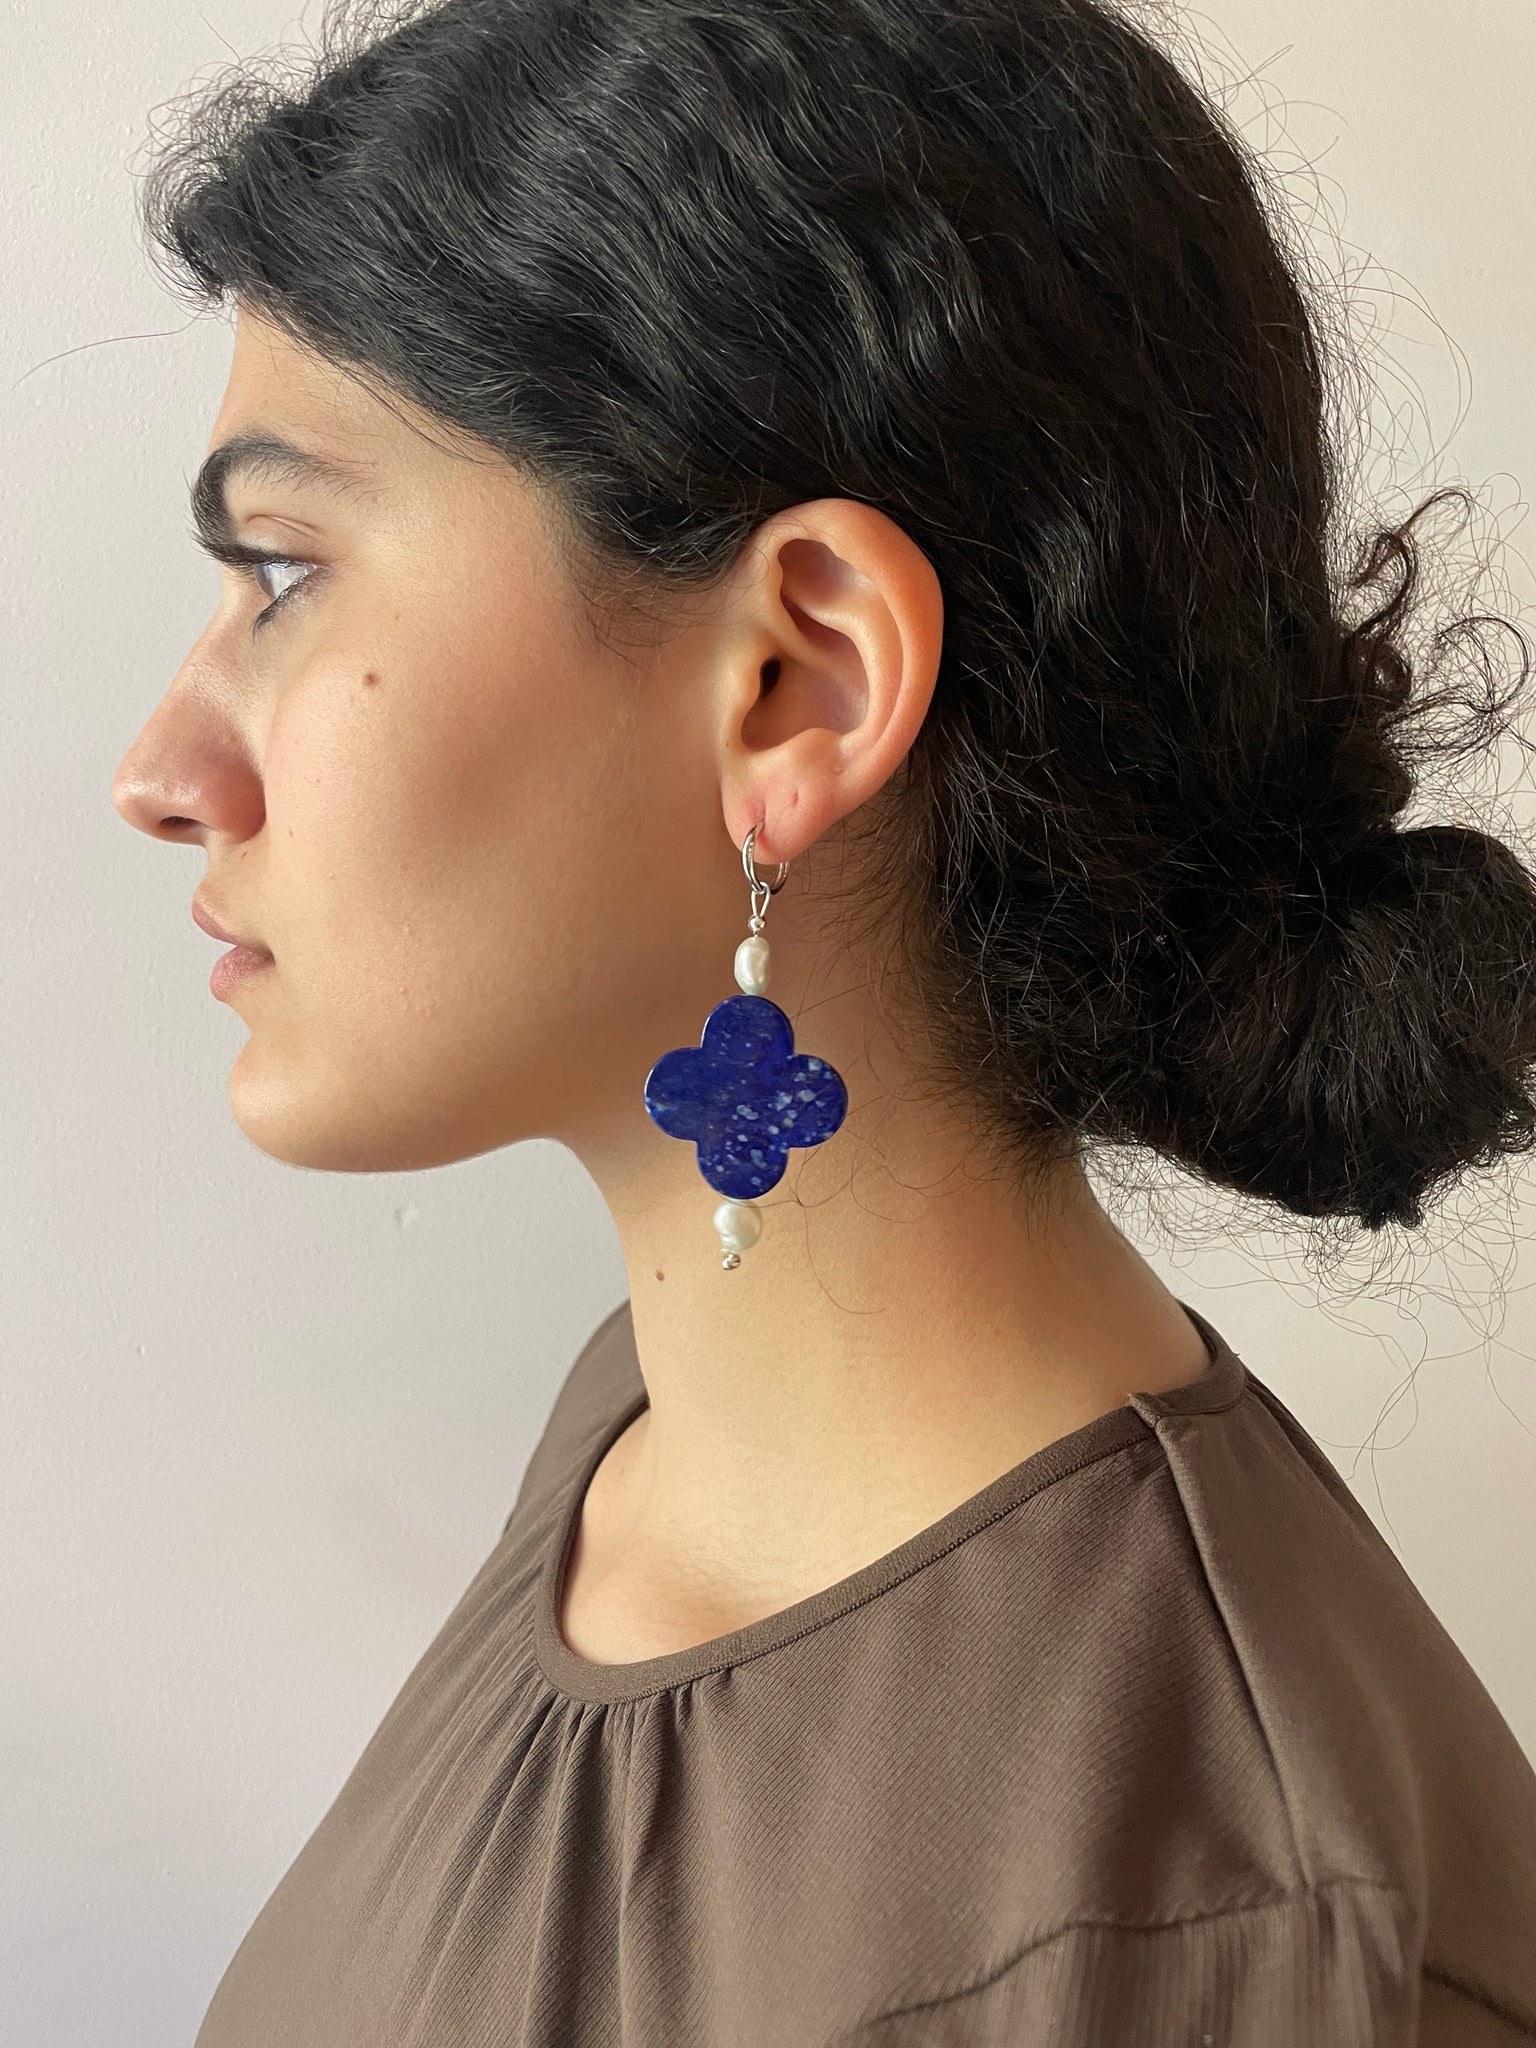 Let there be Light Earrings, Blue Lapis